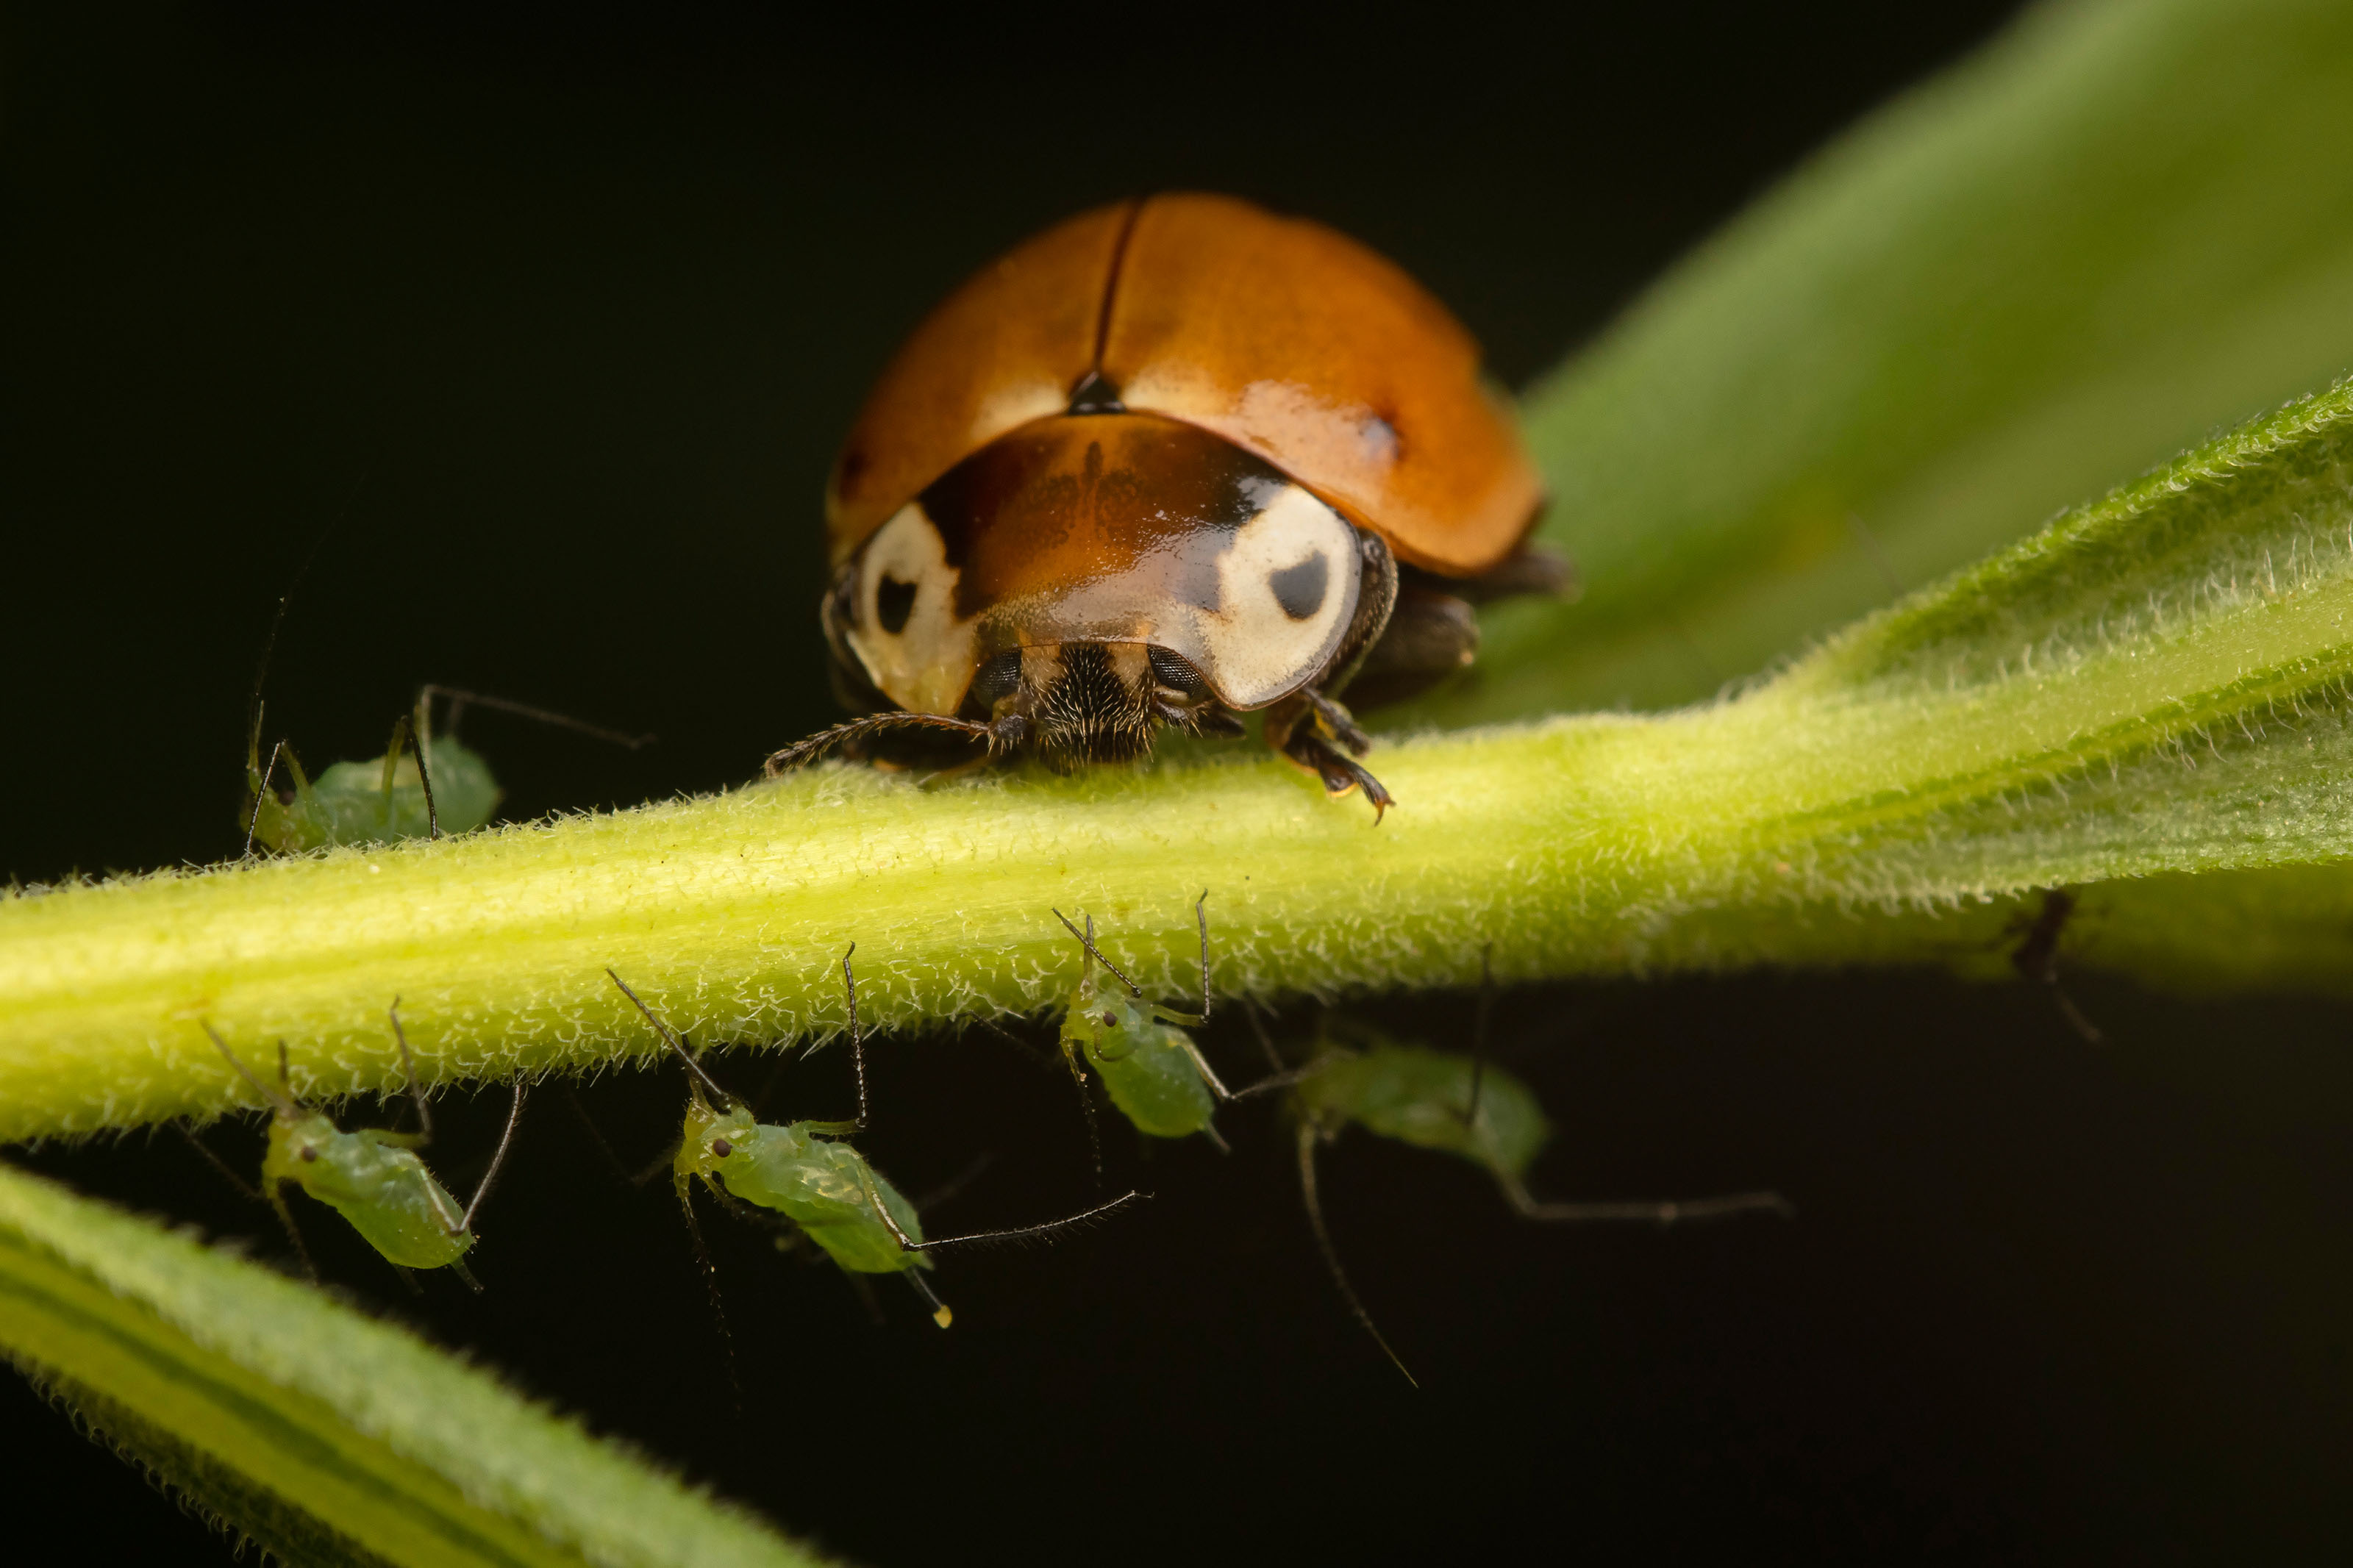 Streaked lady beetle feeds on small aphids on plant.